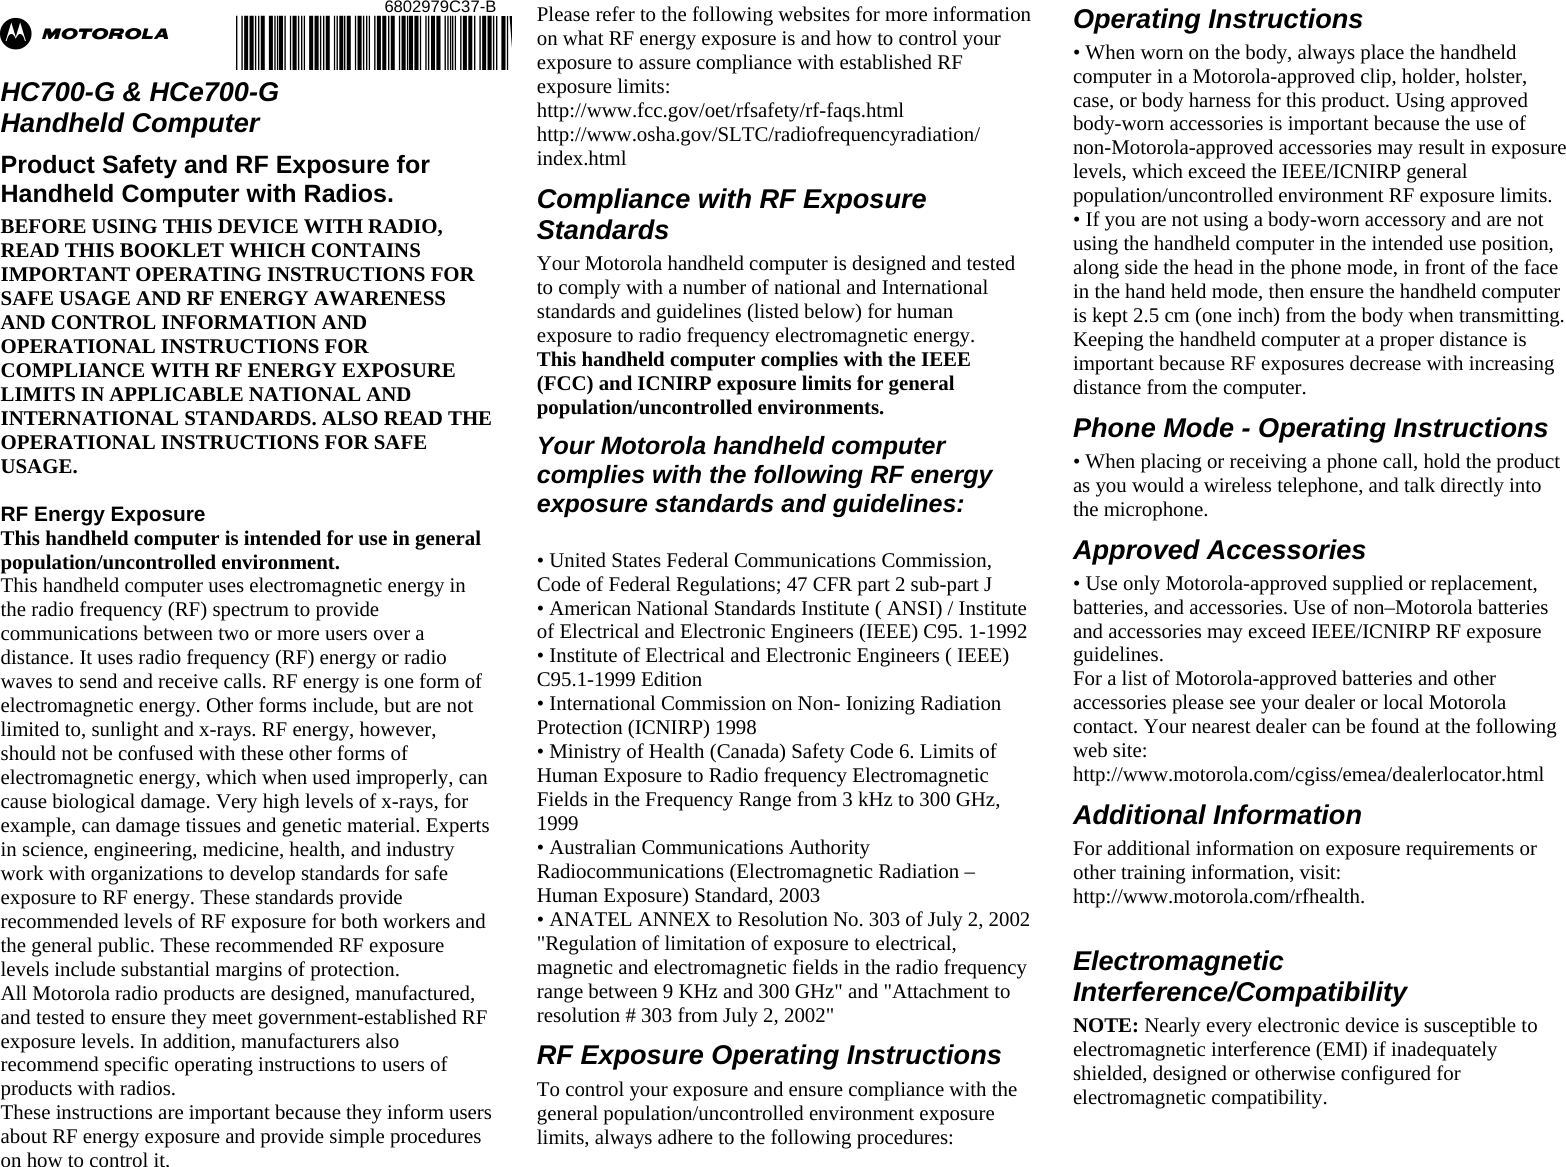 Ab  HC700-G &amp; HCe700-G  Handheld Computer Product Safety and RF Exposure for Handheld Computer with Radios. BEFORE USING THIS DEVICE WITH RADIO, READ THIS BOOKLET WHICH CONTAINS IMPORTANT OPERATING INSTRUCTIONS FOR SAFE USAGE AND RF ENERGY AWARENESS AND CONTROL INFORMATION AND OPERATIONAL INSTRUCTIONS FOR COMPLIANCE WITH RF ENERGY EXPOSURE LIMITS IN APPLICABLE NATIONAL AND INTERNATIONAL STANDARDS. ALSO READ THE OPERATIONAL INSTRUCTIONS FOR SAFE USAGE.   RF Energy Exposure  This handheld computer is intended for use in general population/uncontrolled environment. This handheld computer uses electromagnetic energy in the radio frequency (RF) spectrum to provide communications between two or more users over a distance. It uses radio frequency (RF) energy or radio waves to send and receive calls. RF energy is one form of electromagnetic energy. Other forms include, but are not limited to, sunlight and x-rays. RF energy, however, should not be confused with these other forms of electromagnetic energy, which when used improperly, can cause biological damage. Very high levels of x-rays, for example, can damage tissues and genetic material. Experts in science, engineering, medicine, health, and industry work with organizations to develop standards for safe exposure to RF energy. These standards provide recommended levels of RF exposure for both workers and the general public. These recommended RF exposure levels include substantial margins of protection. All Motorola radio products are designed, manufactured, and tested to ensure they meet government-established RF exposure levels. In addition, manufacturers also recommend specific operating instructions to users of products with radios.  These instructions are important because they inform users about RF energy exposure and provide simple procedures on how to control it. Please refer to the following websites for more information on what RF energy exposure is and how to control your exposure to assure compliance with established RF exposure limits: http://www.fcc.gov/oet/rfsafety/rf-faqs.html http://www.osha.gov/SLTC/radiofrequencyradiation/ index.html Compliance with RF Exposure Standards Your Motorola handheld computer is designed and tested to comply with a number of national and International standards and guidelines (listed below) for human exposure to radio frequency electromagnetic energy.  This handheld computer complies with the IEEE (FCC) and ICNIRP exposure limits for general population/uncontrolled environments.  Your Motorola handheld computer complies with the following RF energy exposure standards and guidelines:  • United States Federal Communications Commission, Code of Federal Regulations; 47 CFR part 2 sub-part J • American National Standards Institute ( ANSI) / Institute of Electrical and Electronic Engineers (IEEE) C95. 1-1992 • Institute of Electrical and Electronic Engineers ( IEEE) C95.1-1999 Edition • International Commission on Non- Ionizing Radiation Protection (ICNIRP) 1998 • Ministry of Health (Canada) Safety Code 6. Limits of Human Exposure to Radio frequency Electromagnetic Fields in the Frequency Range from 3 kHz to 300 GHz, 1999 • Australian Communications Authority Radiocommunications (Electromagnetic Radiation – Human Exposure) Standard, 2003 • ANATEL ANNEX to Resolution No. 303 of July 2, 2002 &quot;Regulation of limitation of exposure to electrical, magnetic and electromagnetic fields in the radio frequency range between 9 KHz and 300 GHz&quot; and &quot;Attachment to resolution # 303 from July 2, 2002&quot;  RF Exposure Operating Instructions  To control your exposure and ensure compliance with the general population/uncontrolled environment exposure limits, always adhere to the following procedures: Operating Instructions • When worn on the body, always place the handheld computer in a Motorola-approved clip, holder, holster, case, or body harness for this product. Using approved body-worn accessories is important because the use of non-Motorola-approved accessories may result in exposure levels, which exceed the IEEE/ICNIRP general population/uncontrolled environment RF exposure limits. • If you are not using a body-worn accessory and are not using the handheld computer in the intended use position, along side the head in the phone mode, in front of the face in the hand held mode, then ensure the handheld computer is kept 2.5 cm (one inch) from the body when transmitting. Keeping the handheld computer at a proper distance is important because RF exposures decrease with increasing distance from the computer. Phone Mode - Operating Instructions • When placing or receiving a phone call, hold the product as you would a wireless telephone, and talk directly into the microphone. Approved Accessories • Use only Motorola-approved supplied or replacement, batteries, and accessories. Use of non–Motorola batteries and accessories may exceed IEEE/ICNIRP RF exposure guidelines. For a list of Motorola-approved batteries and other accessories please see your dealer or local Motorola contact. Your nearest dealer can be found at the following web site: http://www.motorola.com/cgiss/emea/dealerlocator.html Additional Information For additional information on exposure requirements or other training information, visit: http://www.motorola.com/rfhealth.        Electromagnetic Interference/Compatibility NOTE: Nearly every electronic device is susceptible to electromagnetic interference (EMI) if inadequately shielded, designed or otherwise configured for electromagnetic compatibility. 6802979C37-B @6802979C37@ 